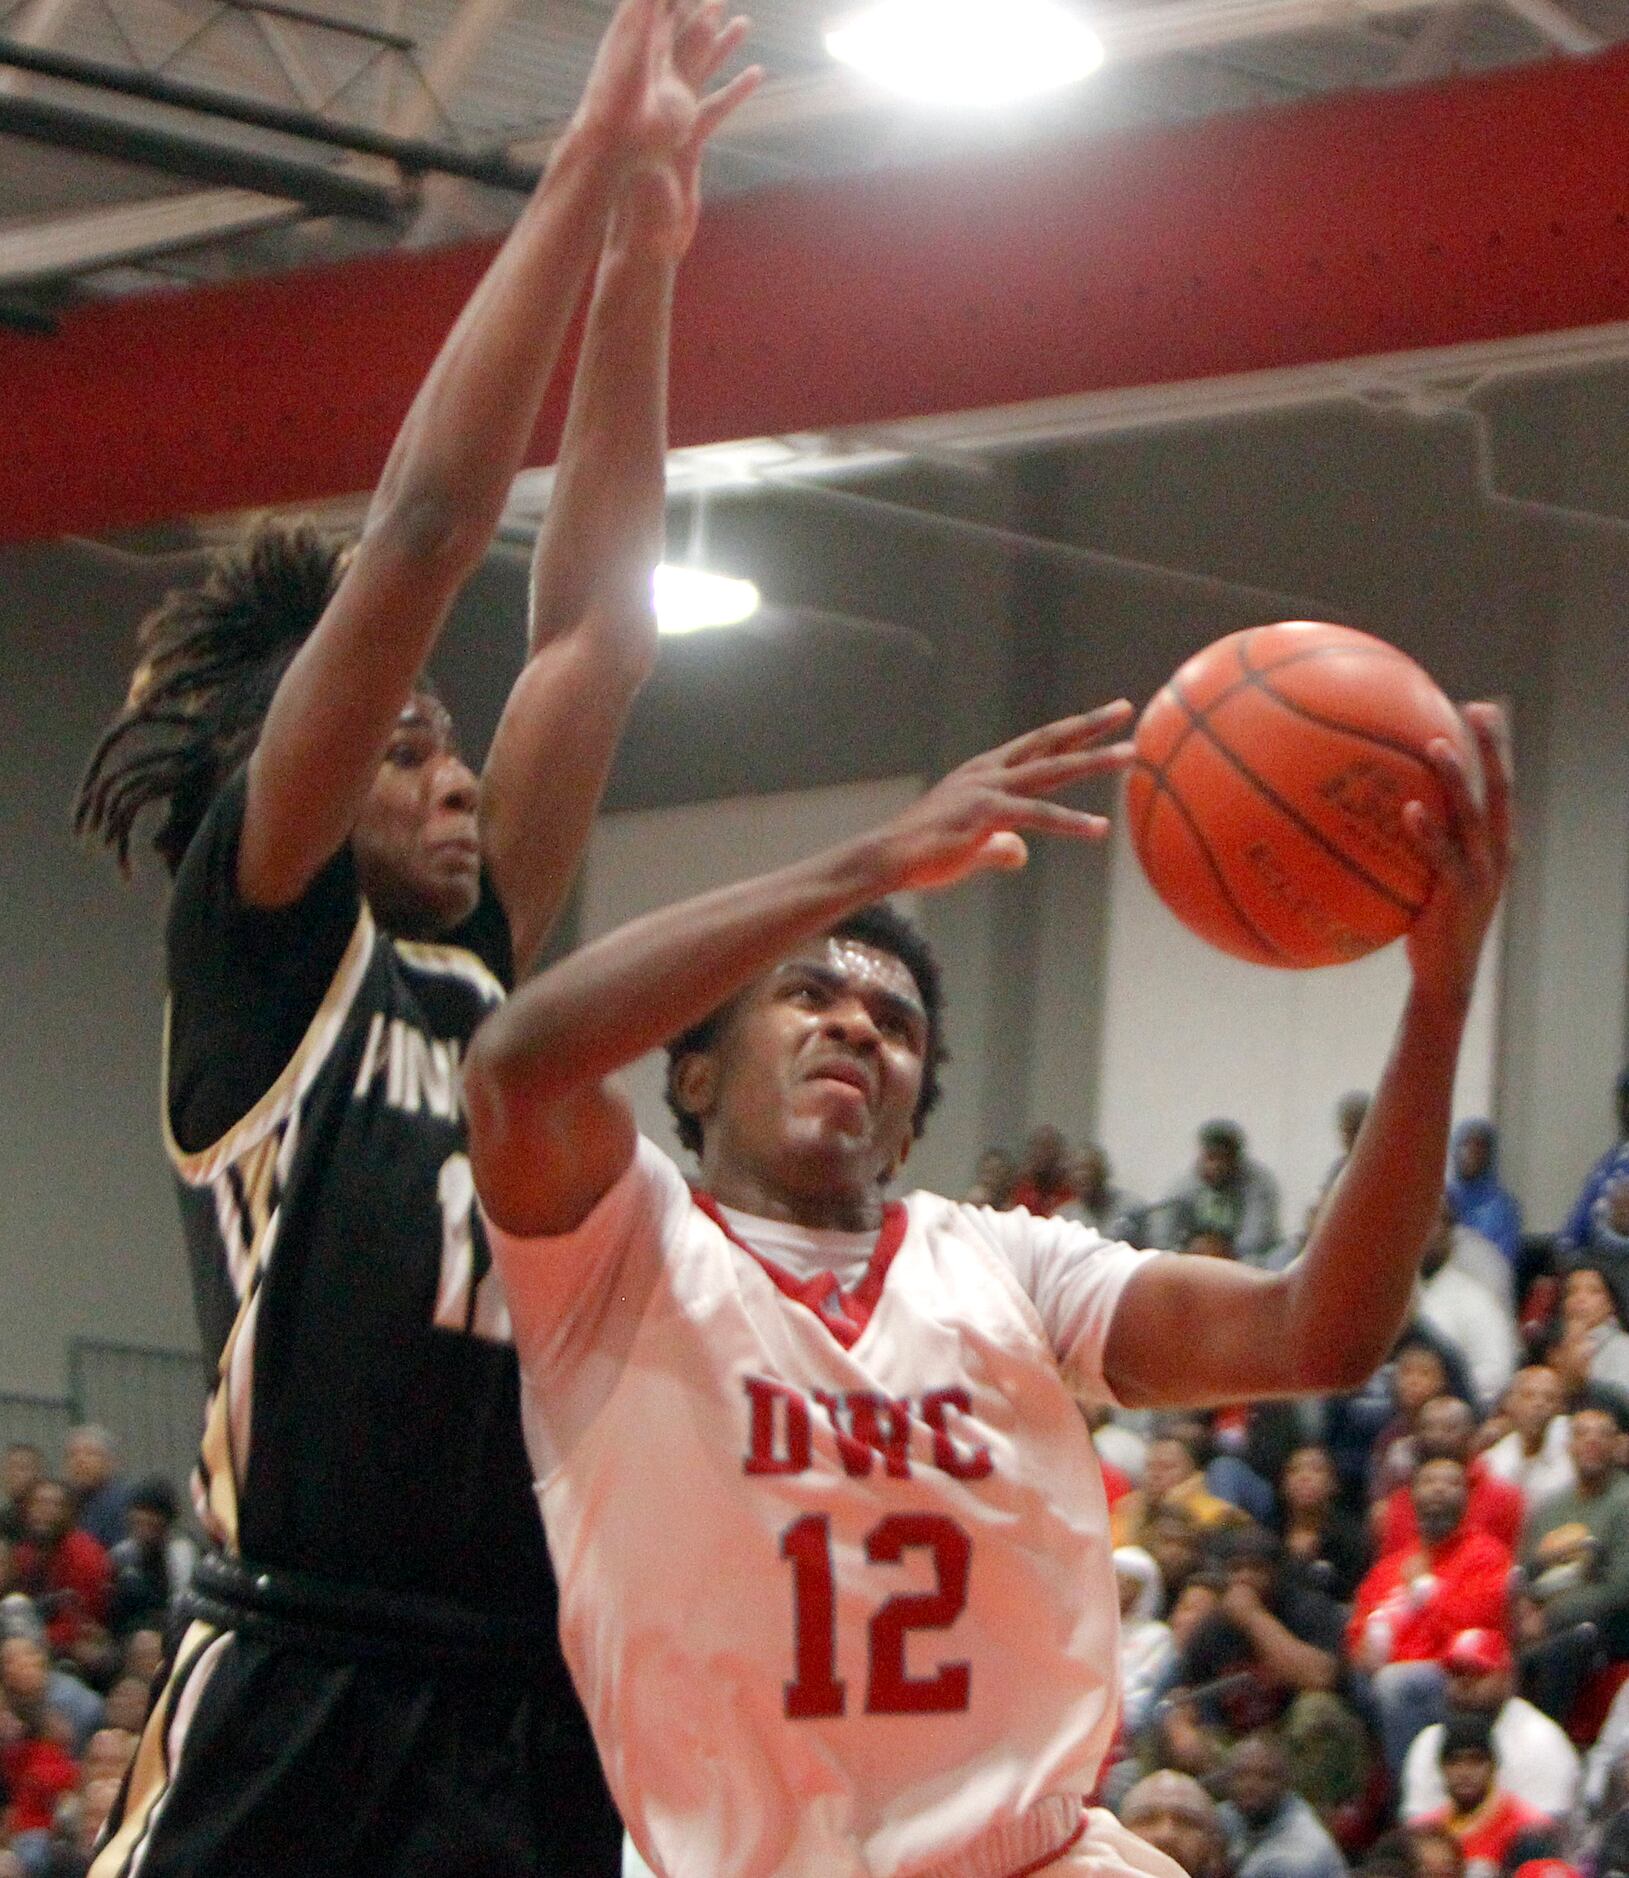 Dallas Carter guard Kyle Givens (12) drives to the basket against the defense of Dallas...